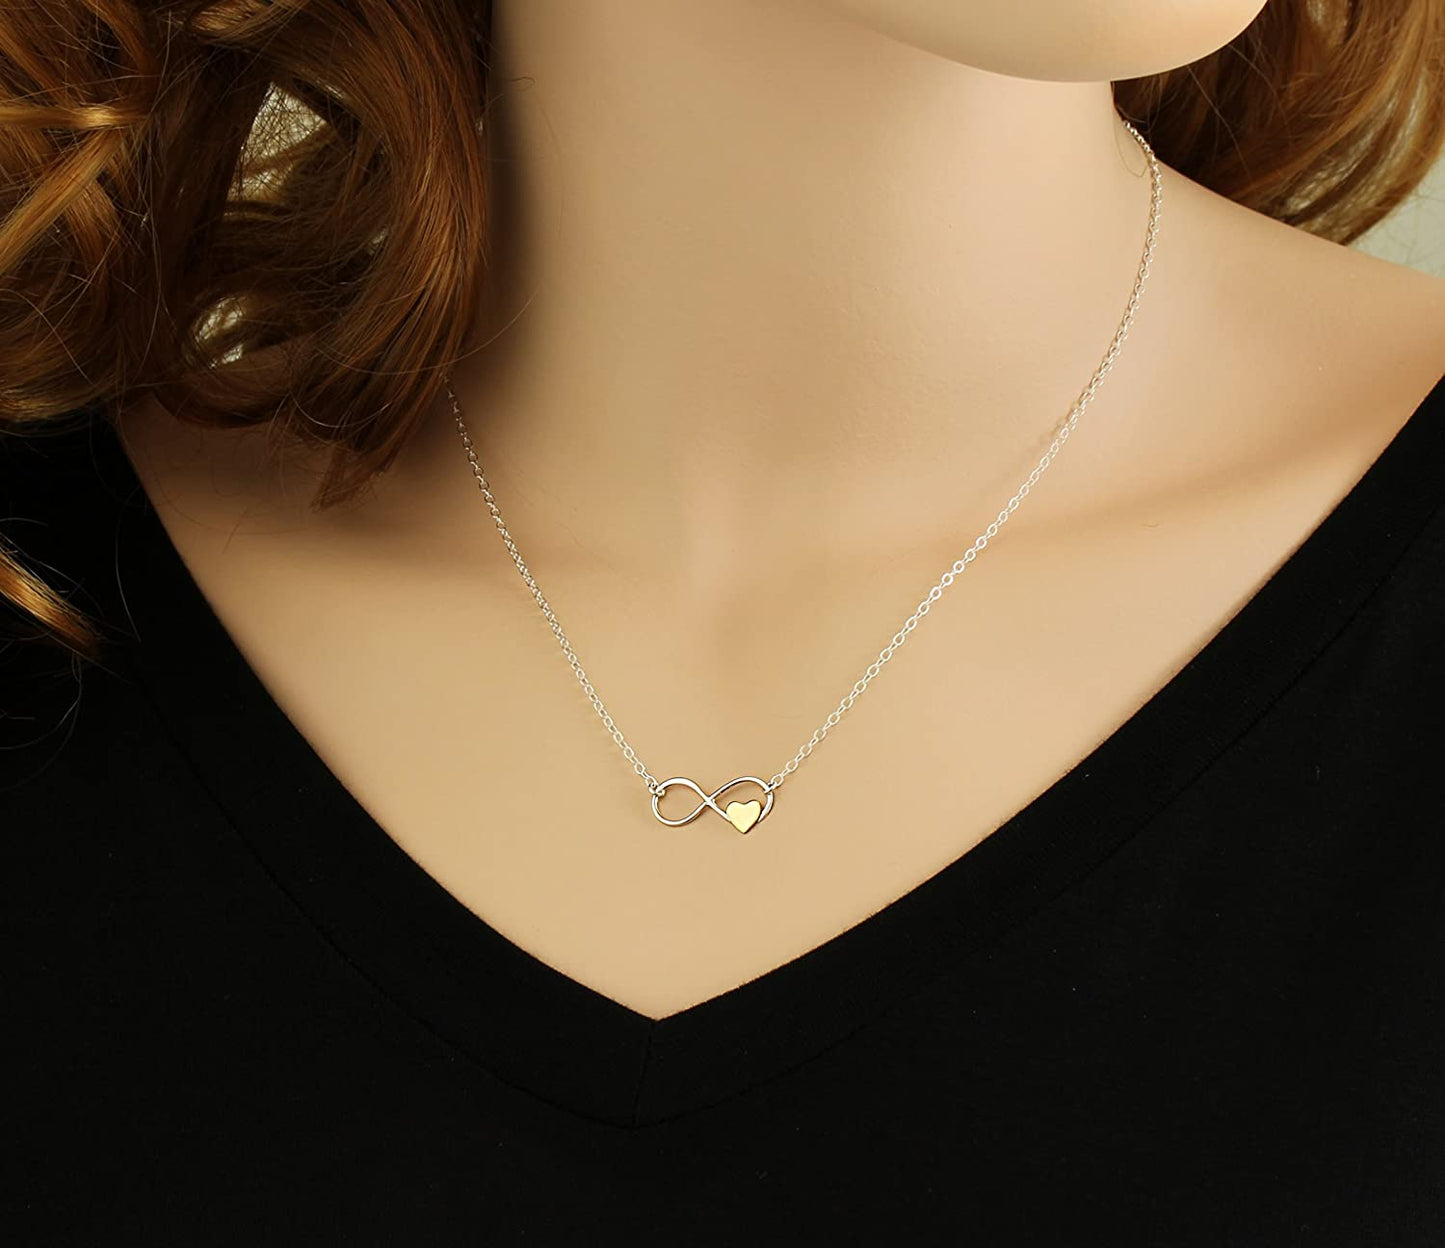 Nanny Gifts from Kids • Christmas Gifts for Women • Gift for Nanny Necklace • Sterling Silver Necklace • Babysitter Gratitude and Appreciation Jewelry • Best Nanny Ever • Infinity Gold Heart Charm